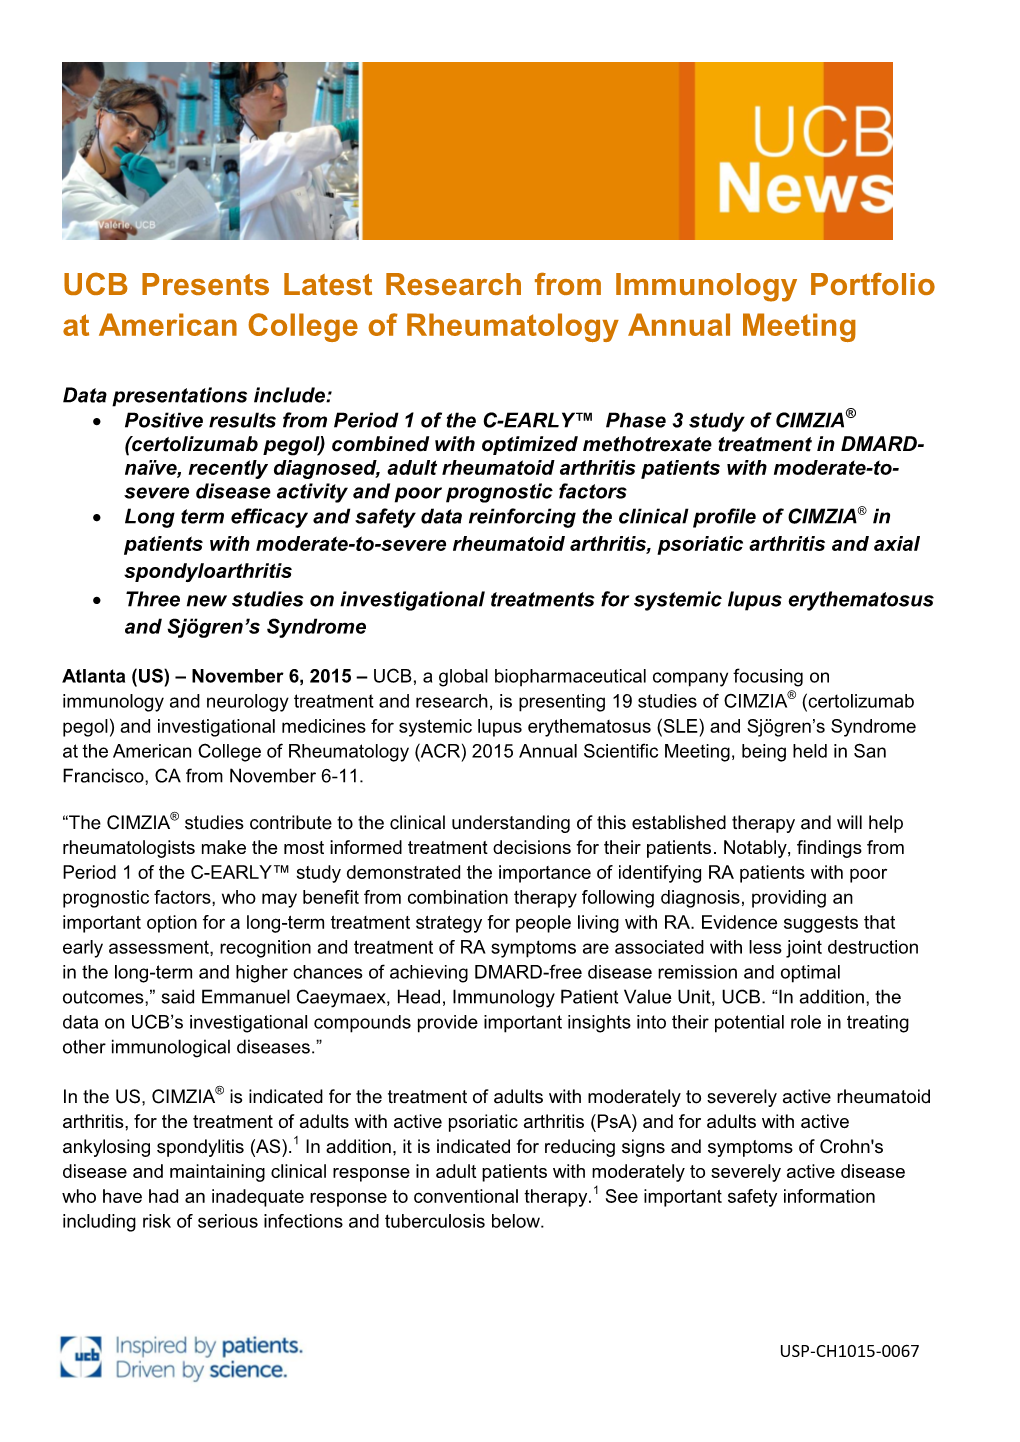 UCB Presents Latest Research from Immunology Portfolio at American College of Rheumatology Annual Meeting